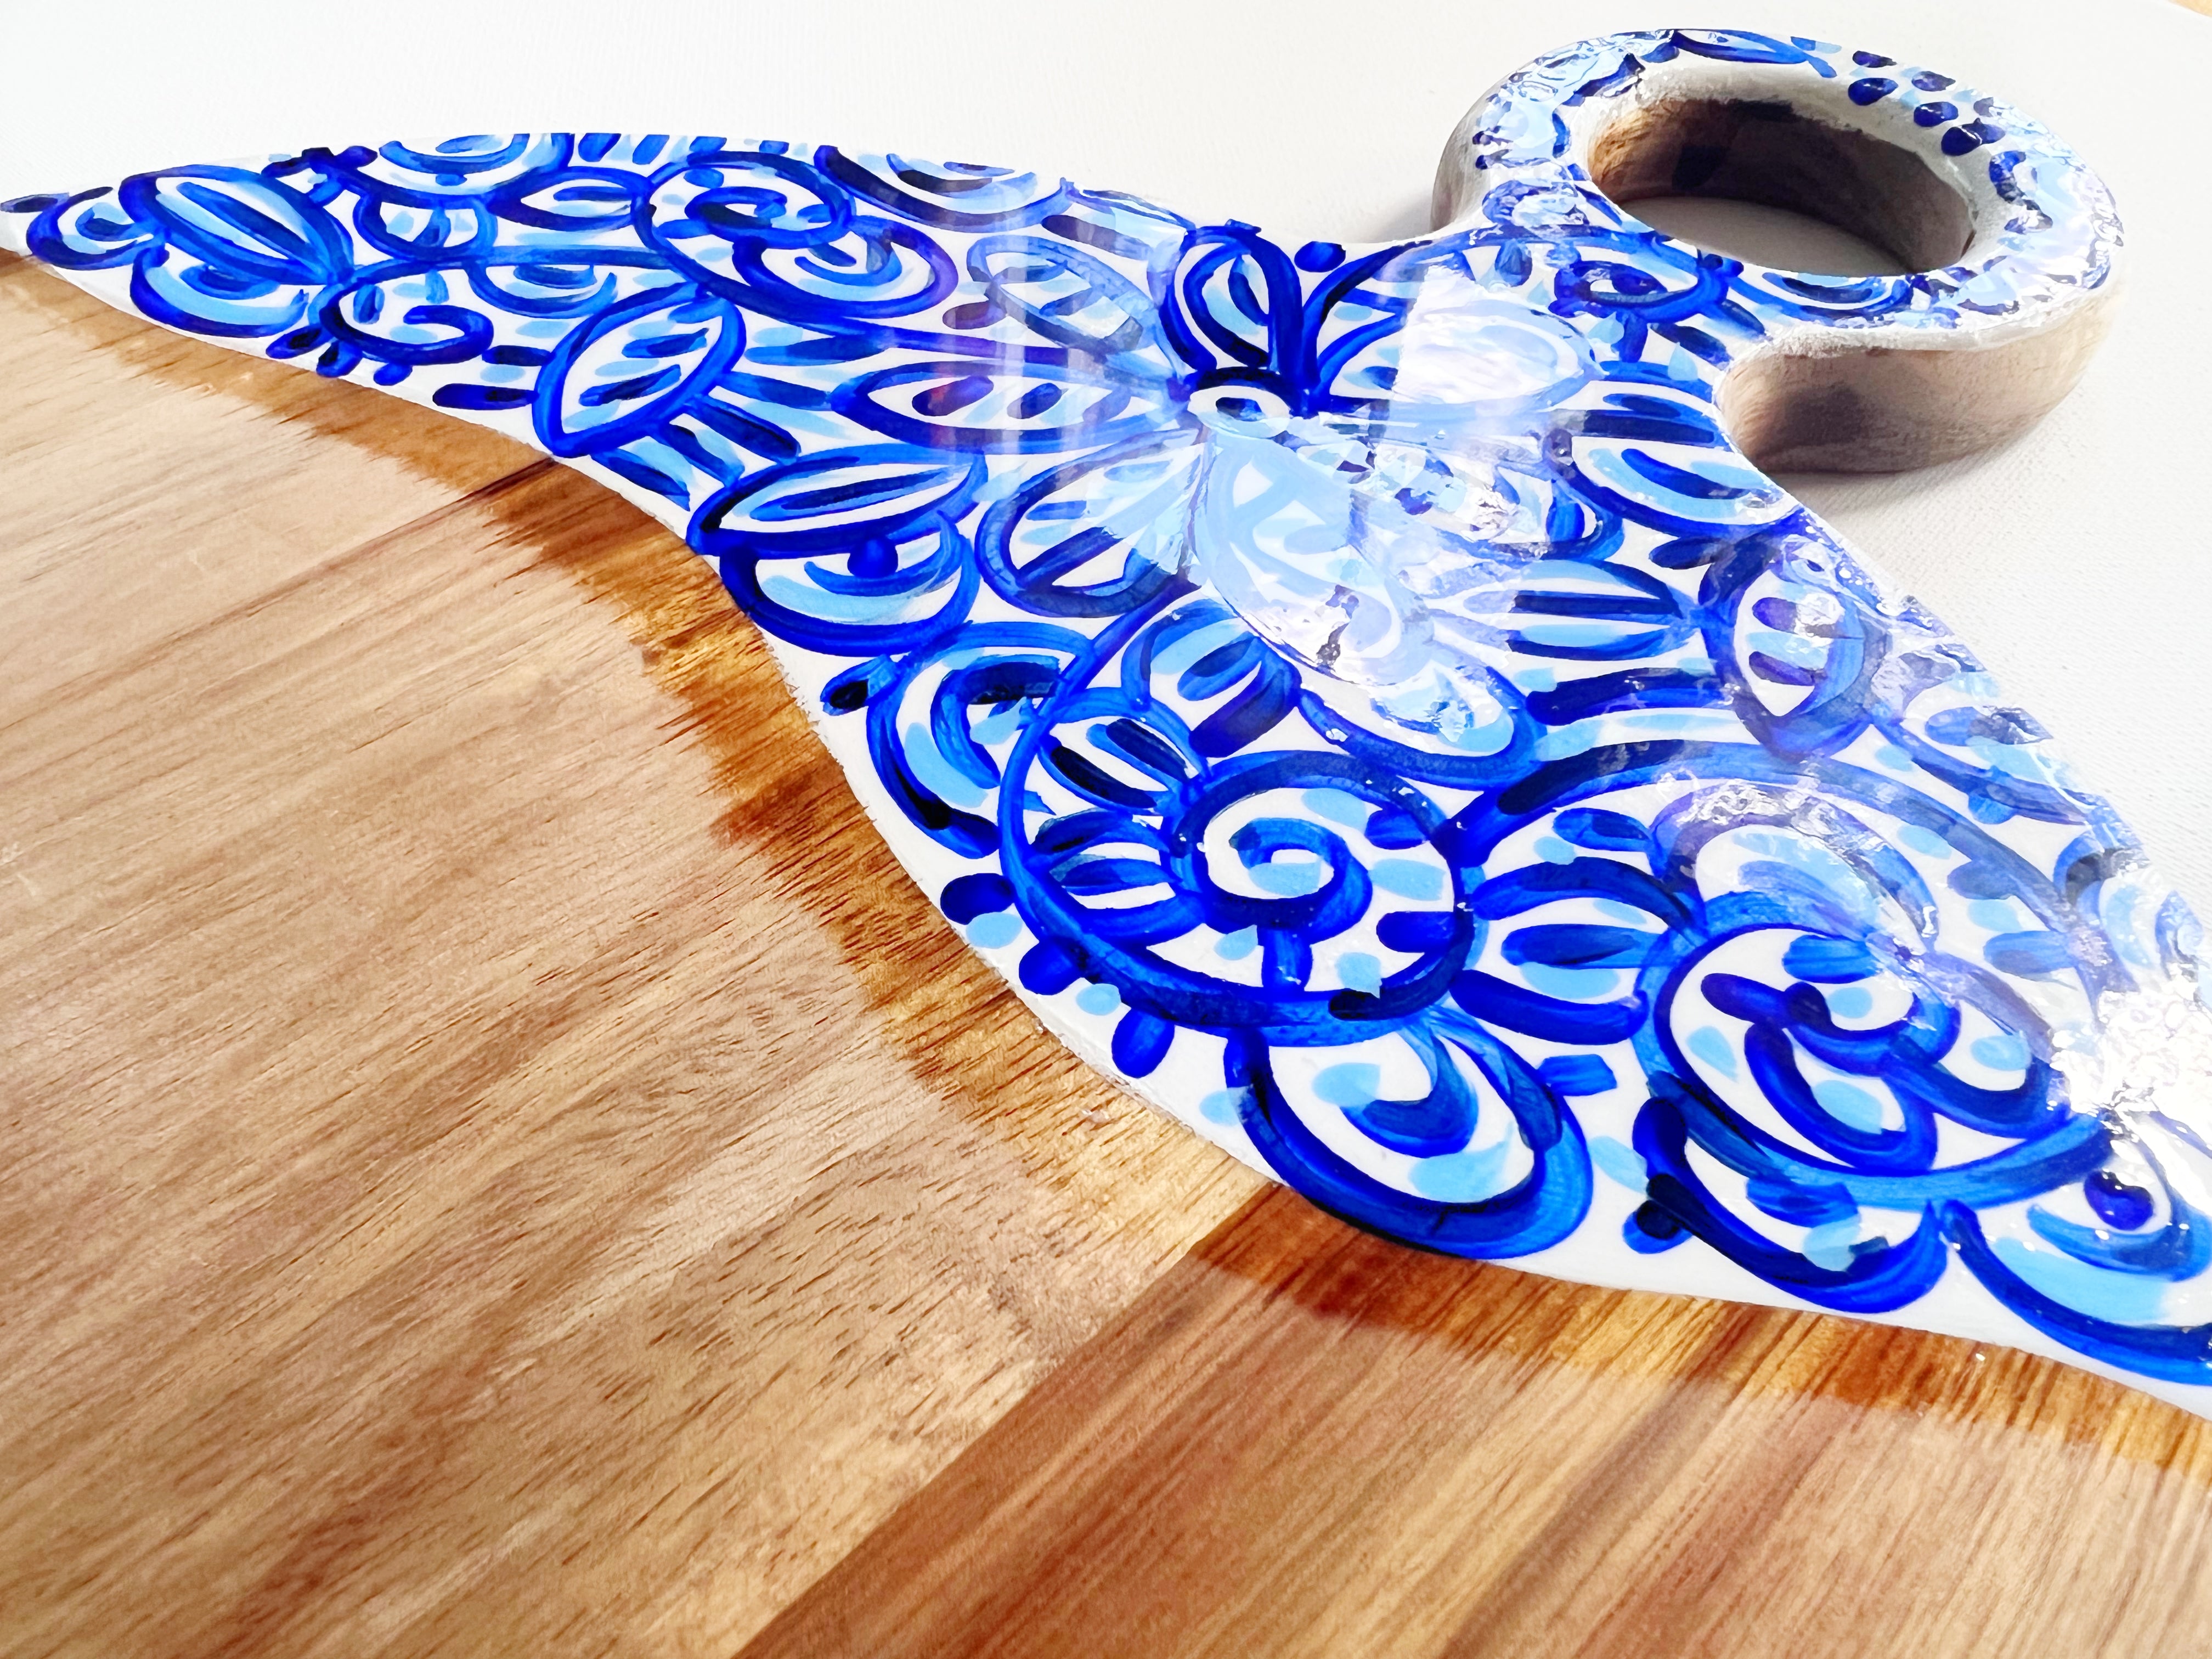 Large Round Cutting Board - Blue and White